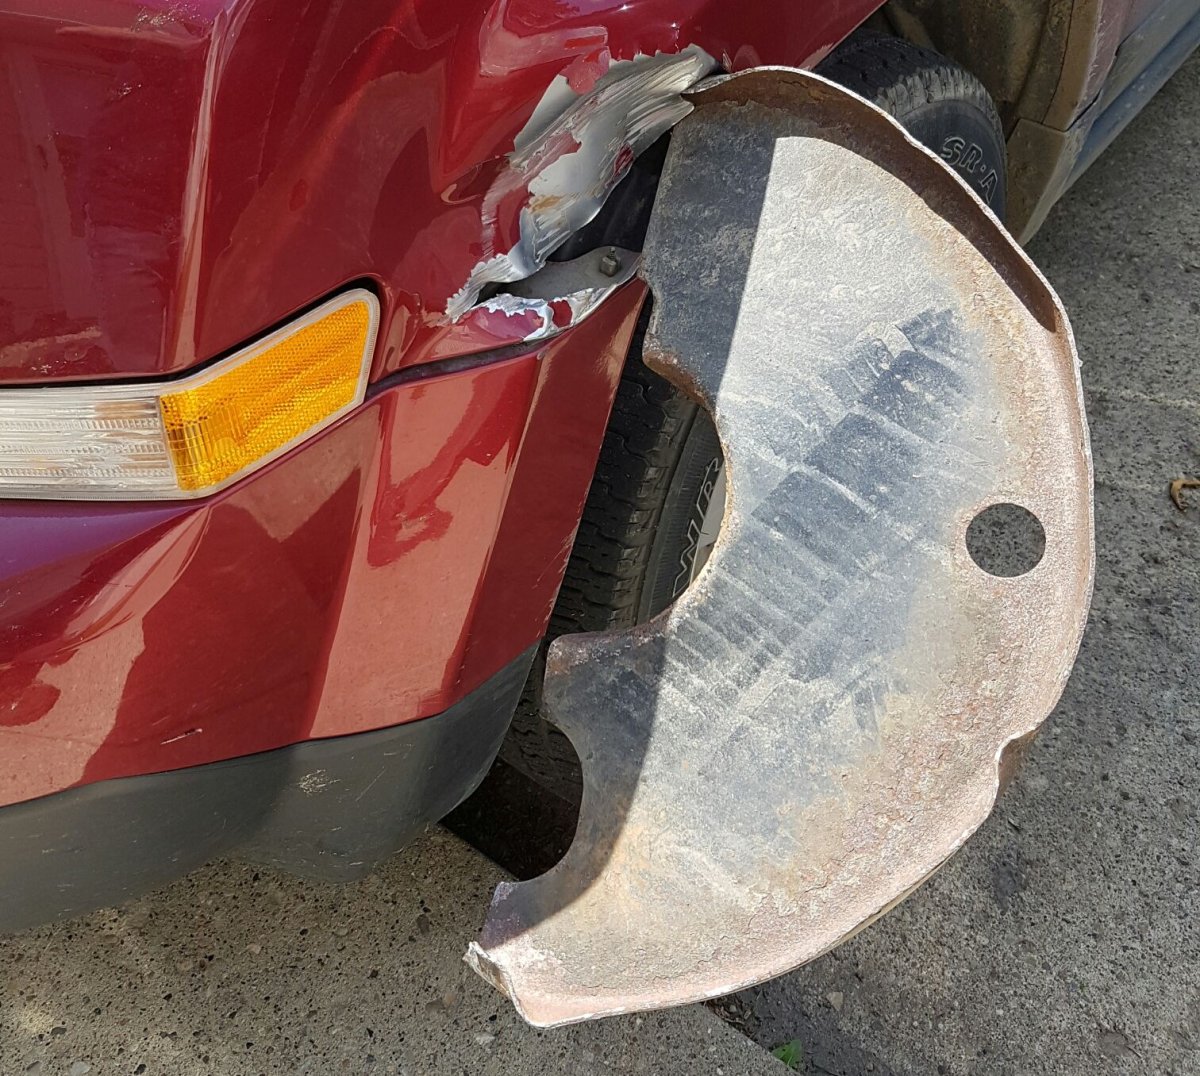 An Edmonton man was driving on the QEII when a large flying hunk of metal embedded itself into his vehicle frame. July 12, 2016.